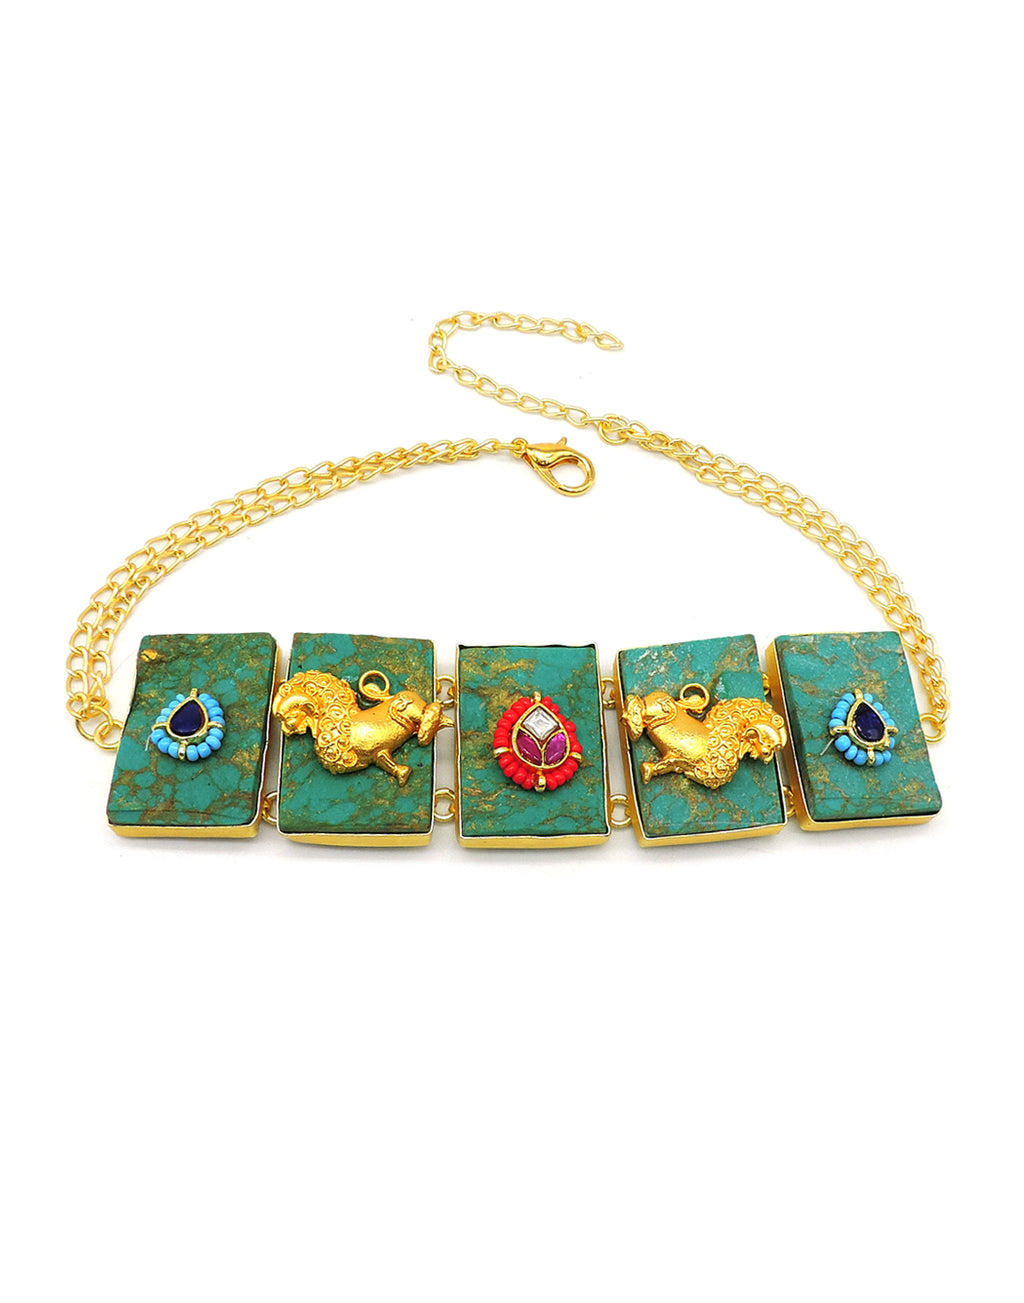 Engraved Bhatti Necklace - Statement Necklaces - Gold-Plated & Hypoallergenic Jewellery - Made in India - Dubai Jewellery - Dori